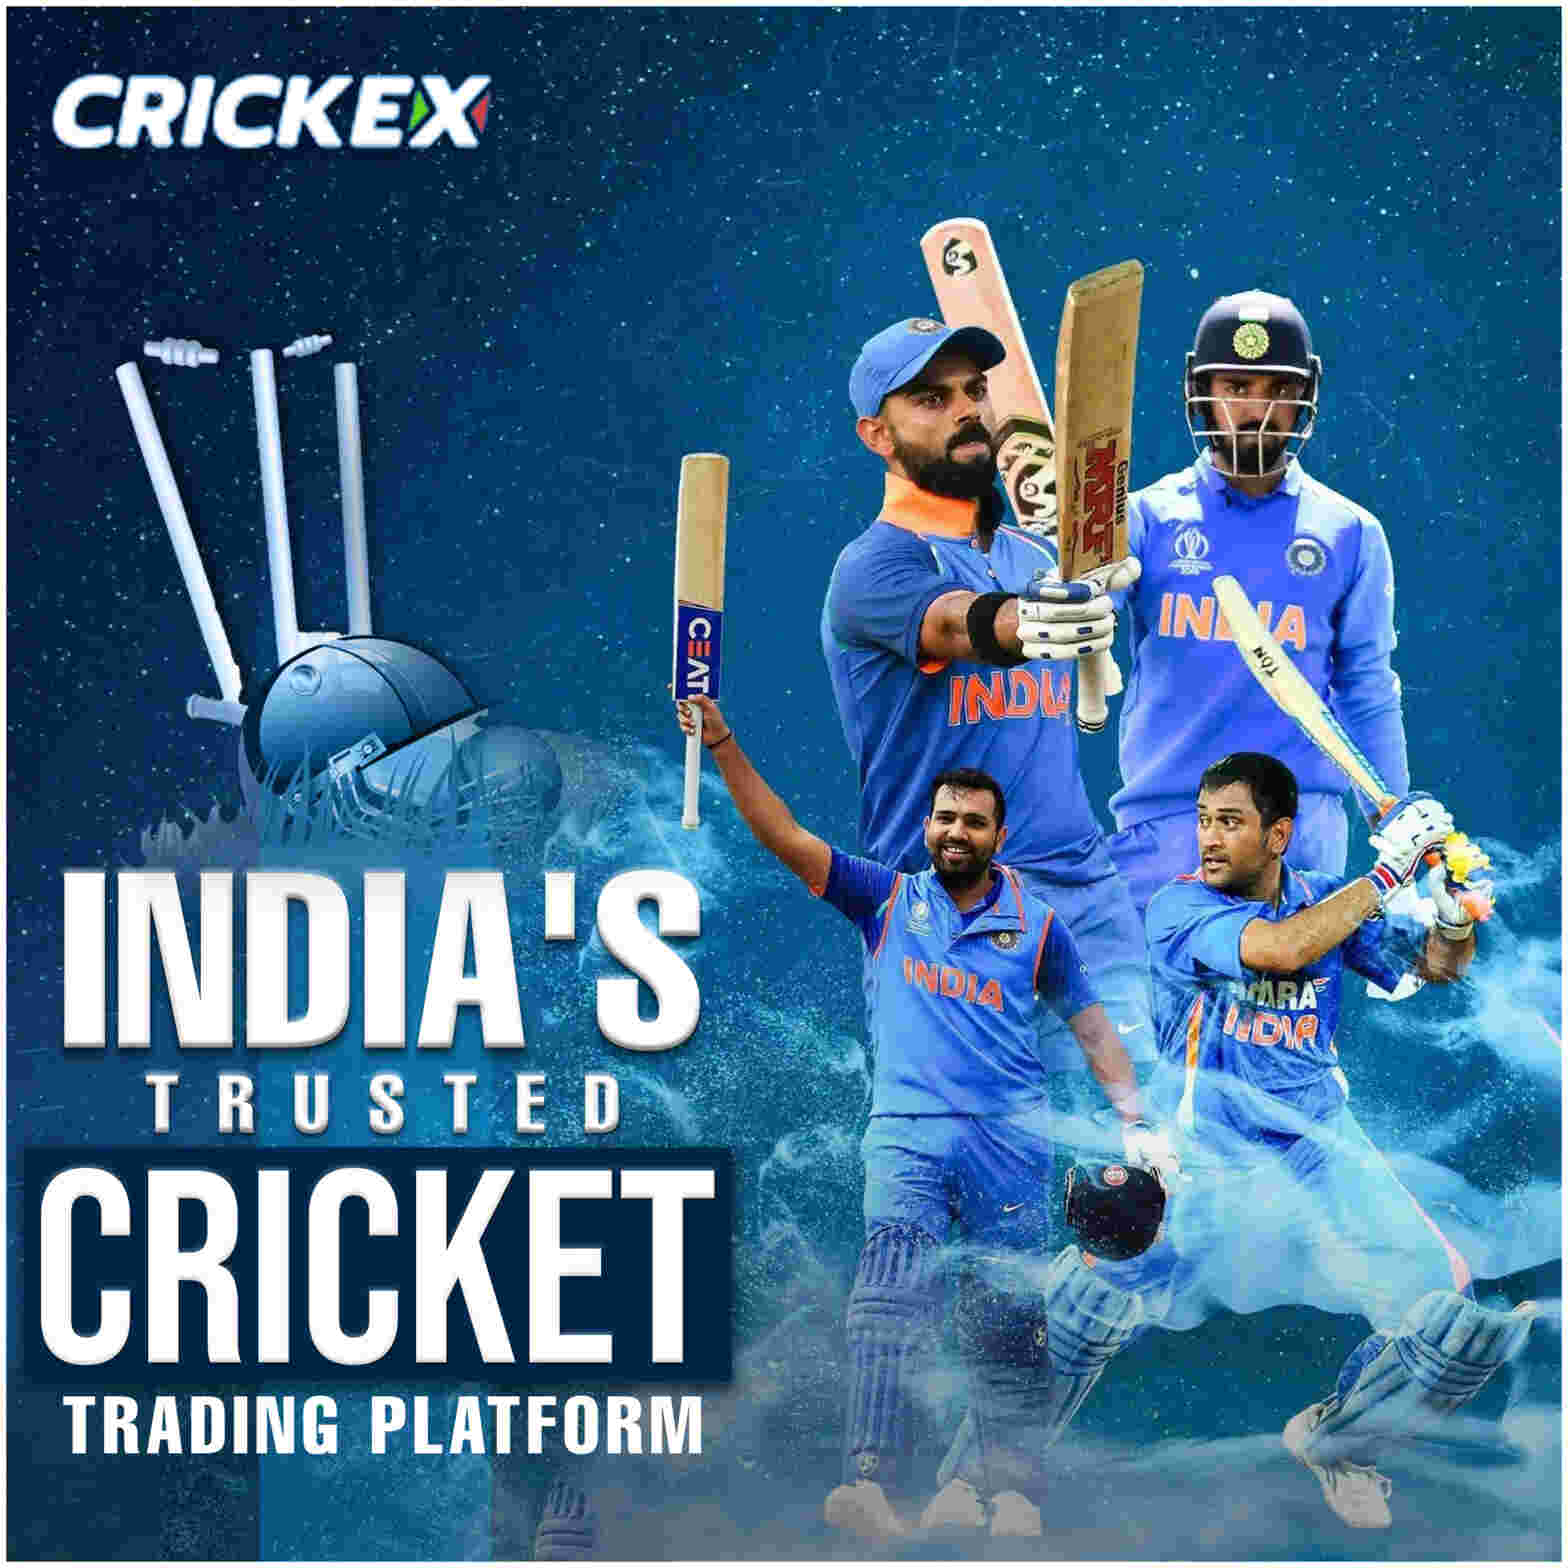 Does Your Best Online Cricket Betting Apps In India Goals Match Your Practices?